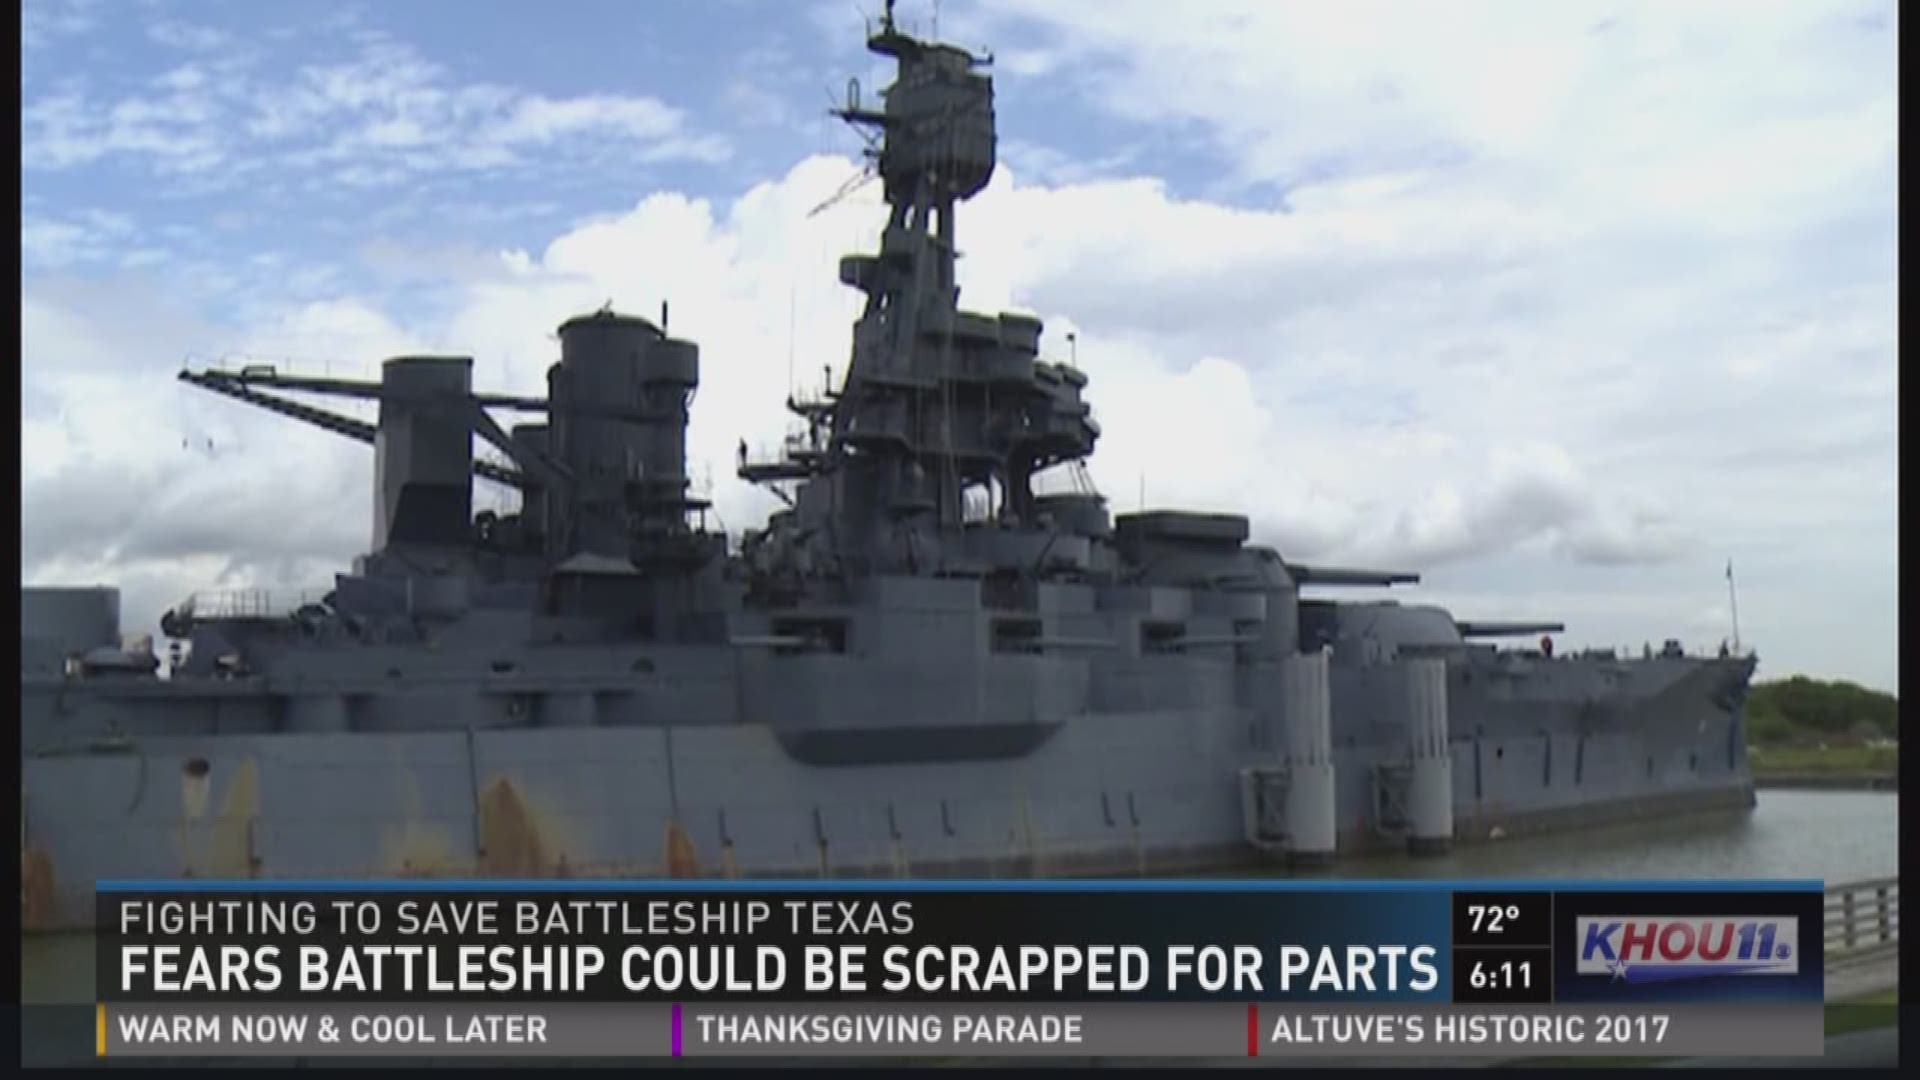 Many people are afraid a national treasure Battleship Texas will be torn down and scrapped for parts. 